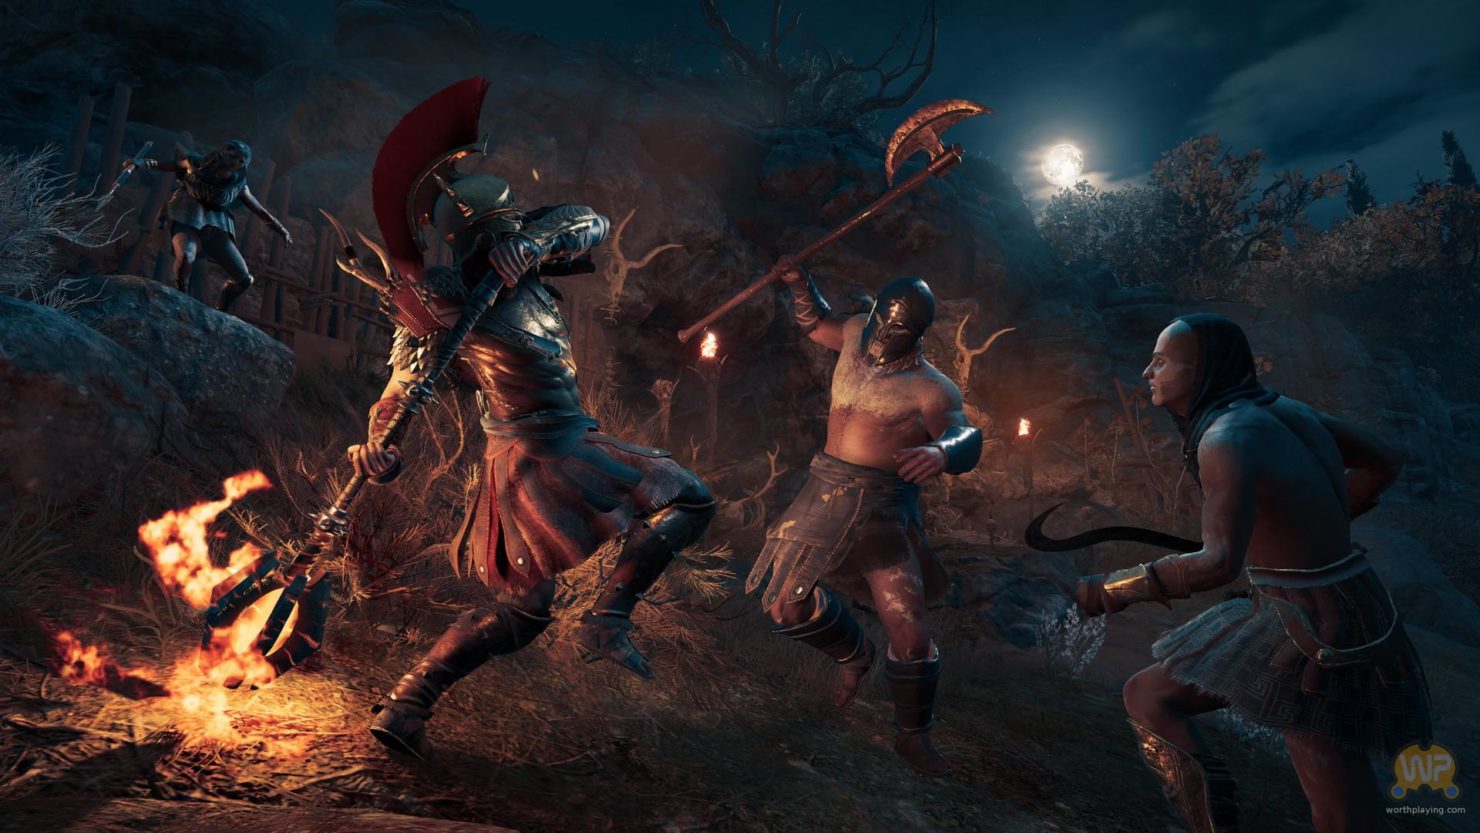 Combat assassin's creed odyssey